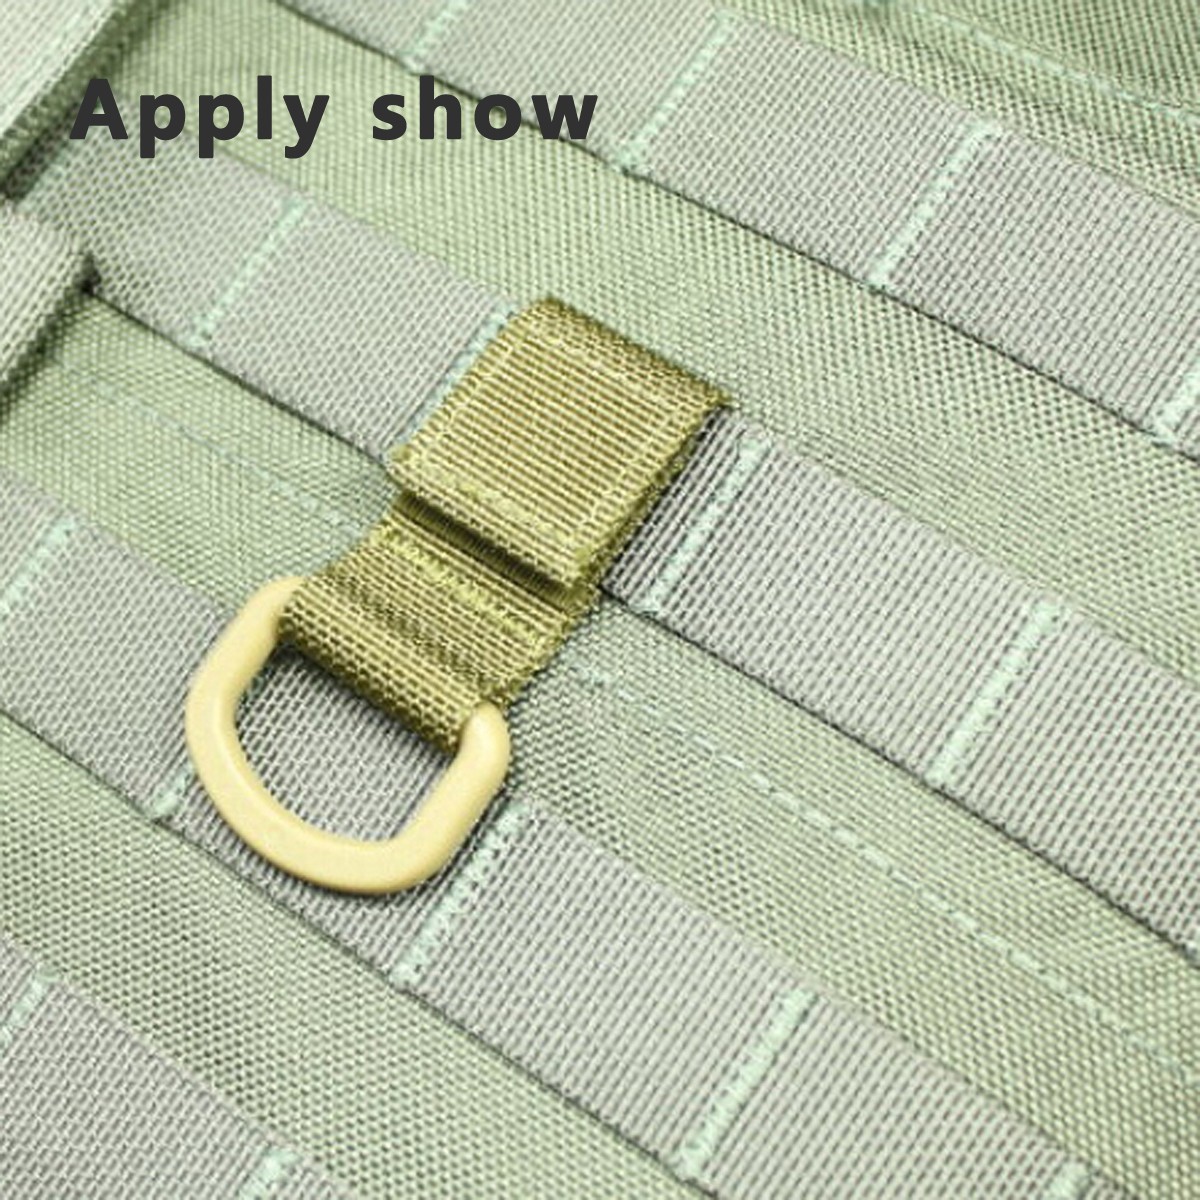 Military-Tactical-Carabiner-Nylon-Strap-Buckle-Hook-Belt-Hanging-Keychain-D-shaped-Ring-Molle-System-1028668-8